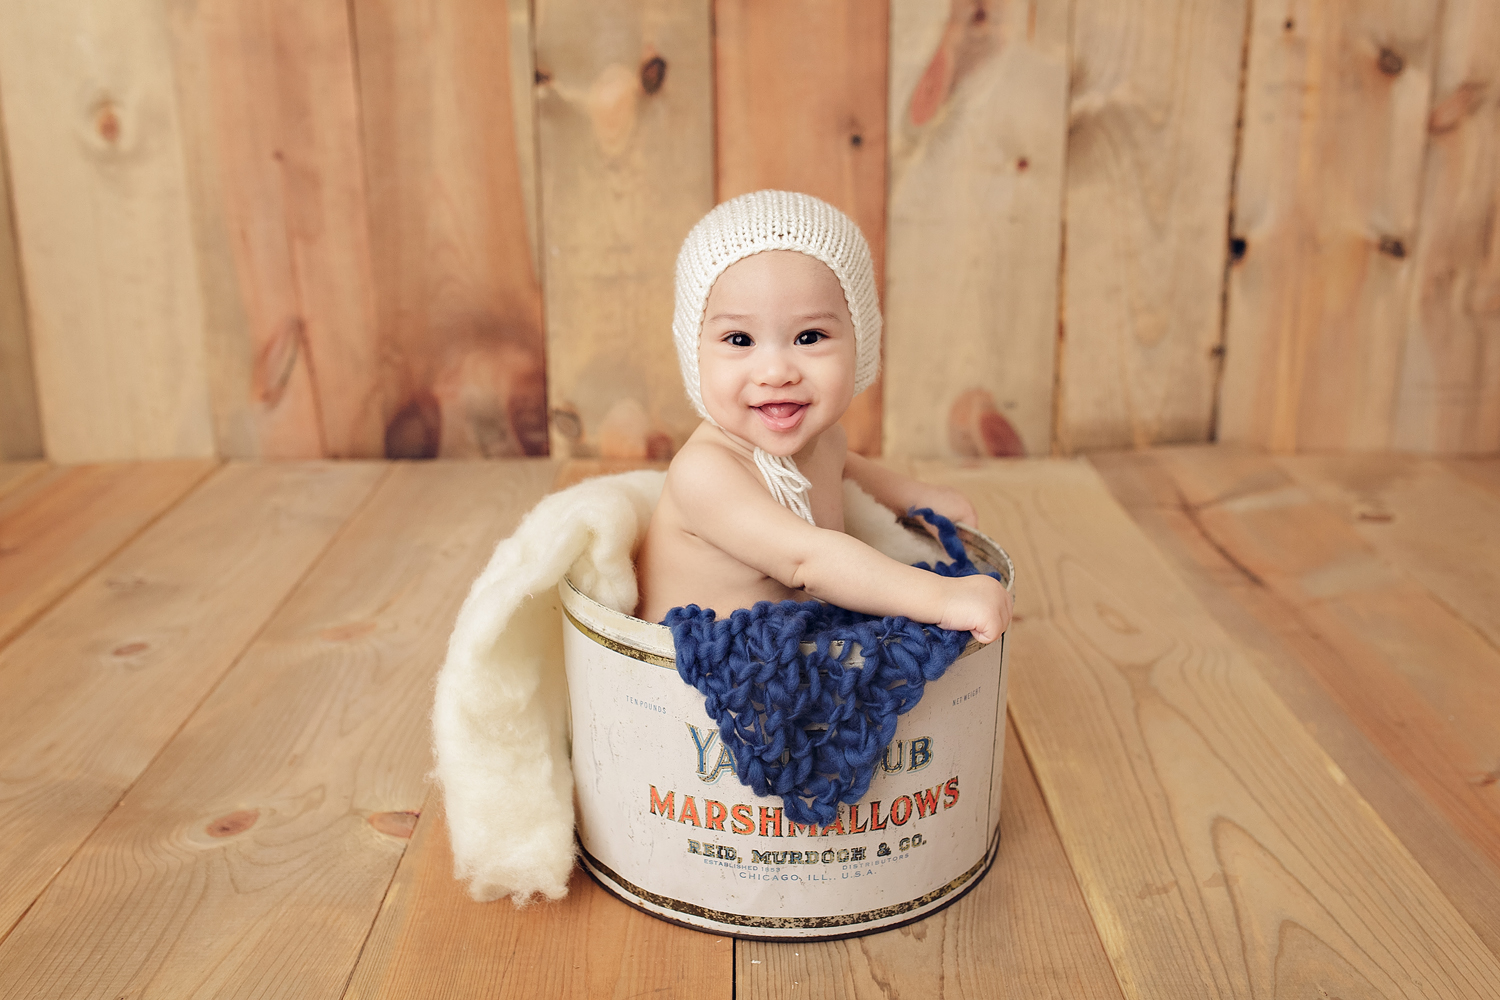 Earthy portraits of baby in a vintage marshmallow tin for his 6 month photo session.